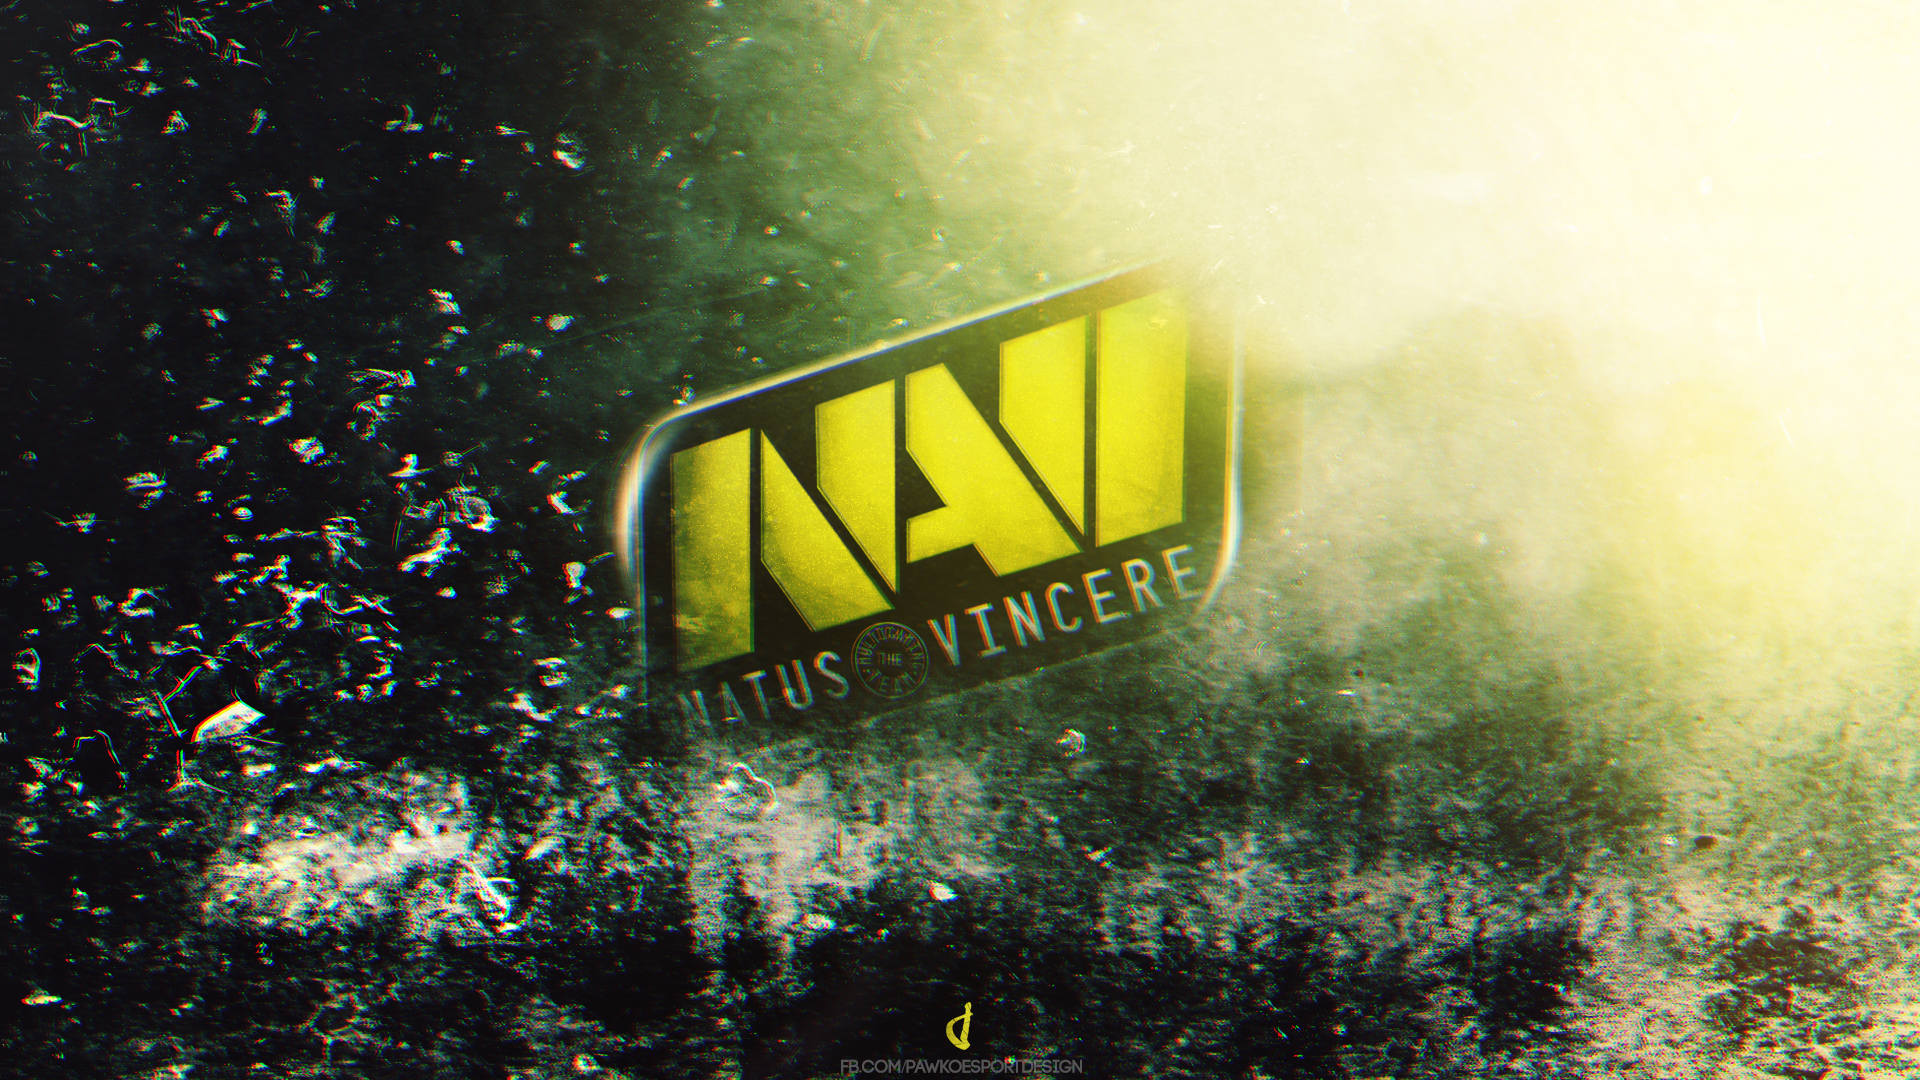 Natus Vincere Created By Fb.com Pawkoesportdesign